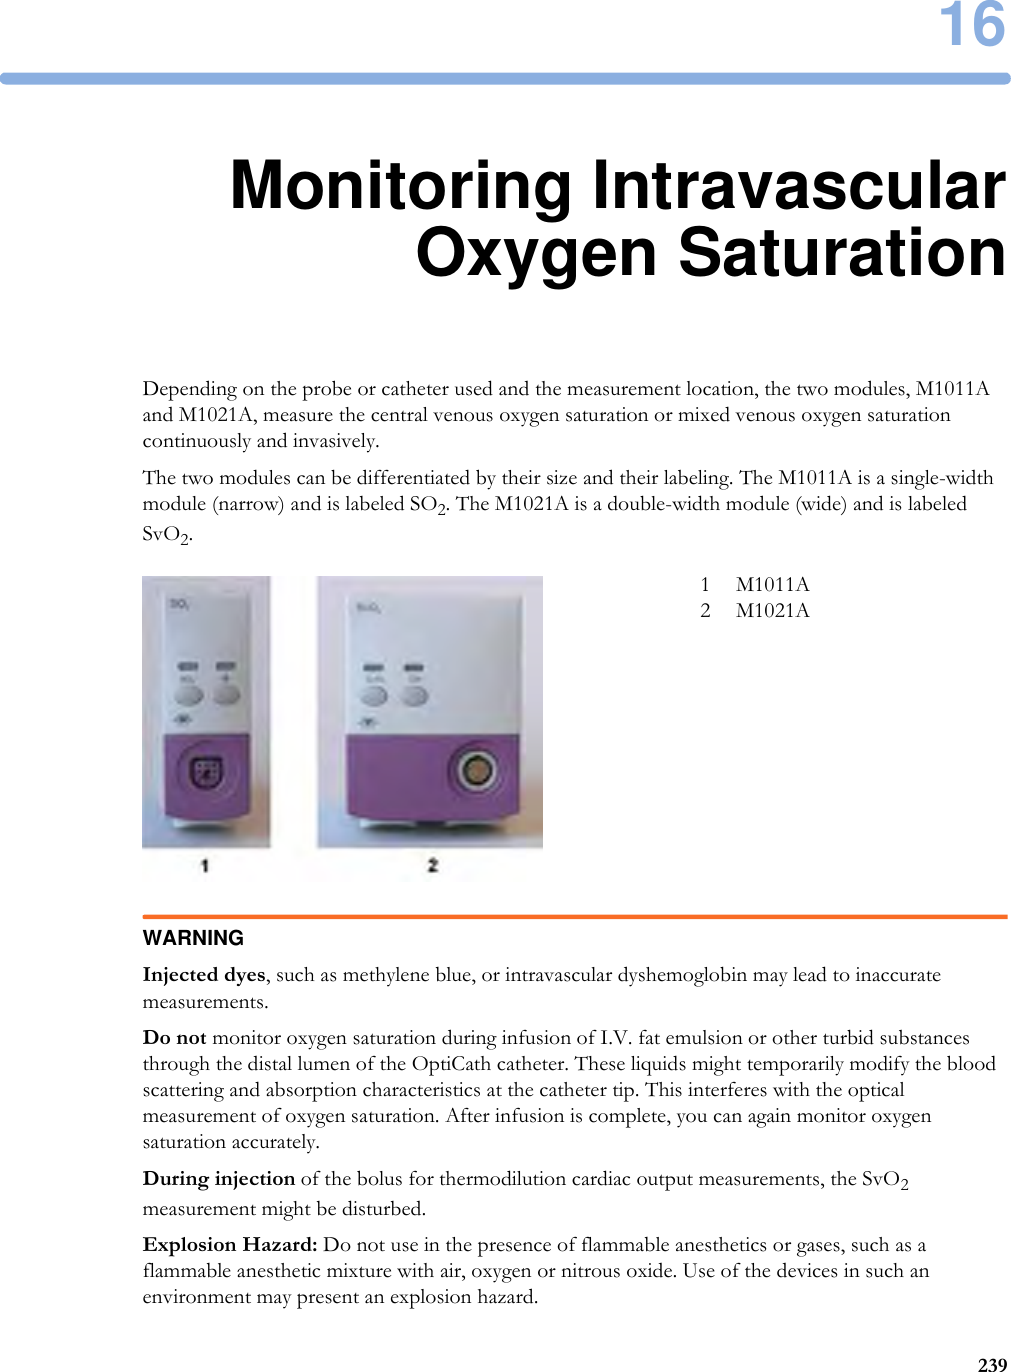 1623916Monitoring IntravascularOxygen SaturationDepending on the probe or catheter used and the measurement location, the two modules, M1011A and M1021A, measure the central venous oxygen saturation or mixed venous oxygen saturation continuously and invasively.The two modules can be differentiated by their size and their labeling. The M1011A is a single-width module (narrow) and is labeled SO2. The M1021A is a double-width module (wide) and is labeled SvO2.WARNINGInjected dyes, such as methylene blue, or intravascular dyshemoglobin may lead to inaccurate measurements.Do not monitor oxygen saturation during infusion of I.V. fat emulsion or other turbid substances through the distal lumen of the OptiCath catheter. These liquids might temporarily modify the blood scattering and absorption characteristics at the catheter tip. This interferes with the optical measurement of oxygen saturation. After infusion is complete, you can again monitor oxygen saturation accurately.During injection of the bolus for thermodilution cardiac output measurements, the SvO2 measurement might be disturbed.Explosion Hazard: Do not use in the presence of flammable anesthetics or gases, such as a flammable anesthetic mixture with air, oxygen or nitrous oxide. Use of the devices in such an environment may present an explosion hazard.1 M1011A2 M1021A